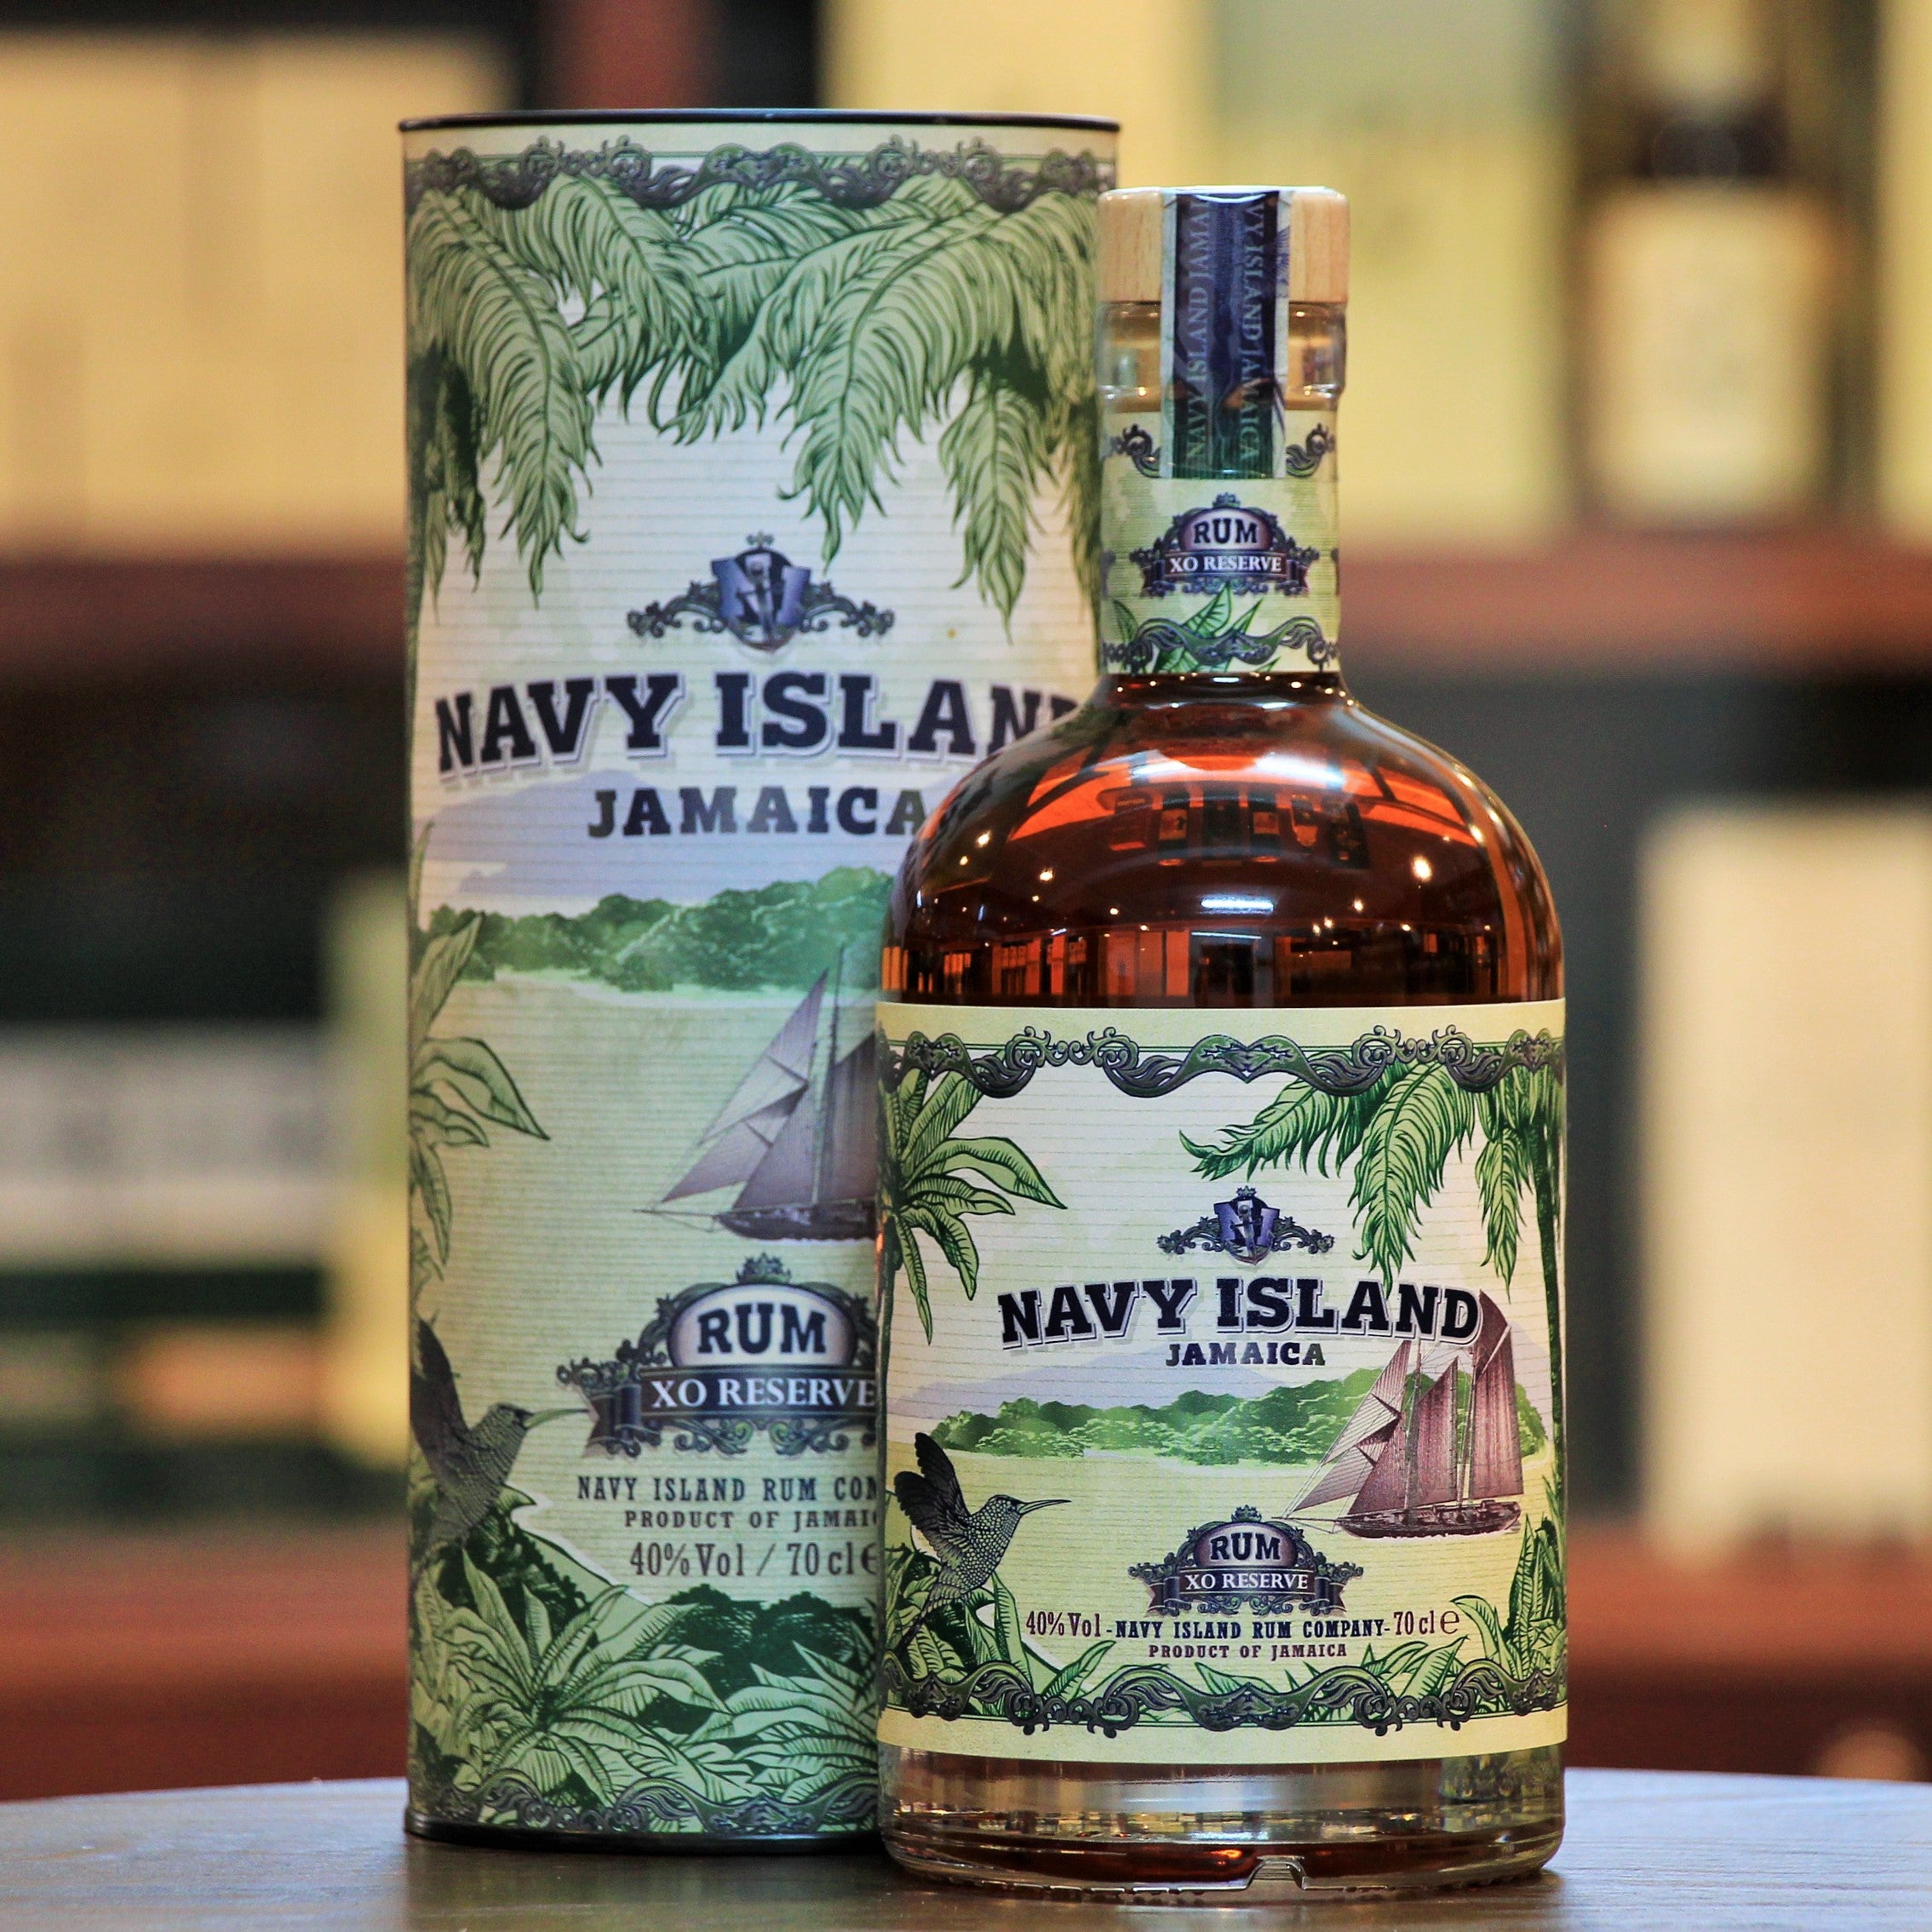 Navy Island Jamaican Rum XO Reserve, A superior blend of hand selected Jamaican rums, including some of the finest aged rums distilled in traditional Jamaican Pot Stills. International Spirits Challenge 2017 & 2019 Silver Medal